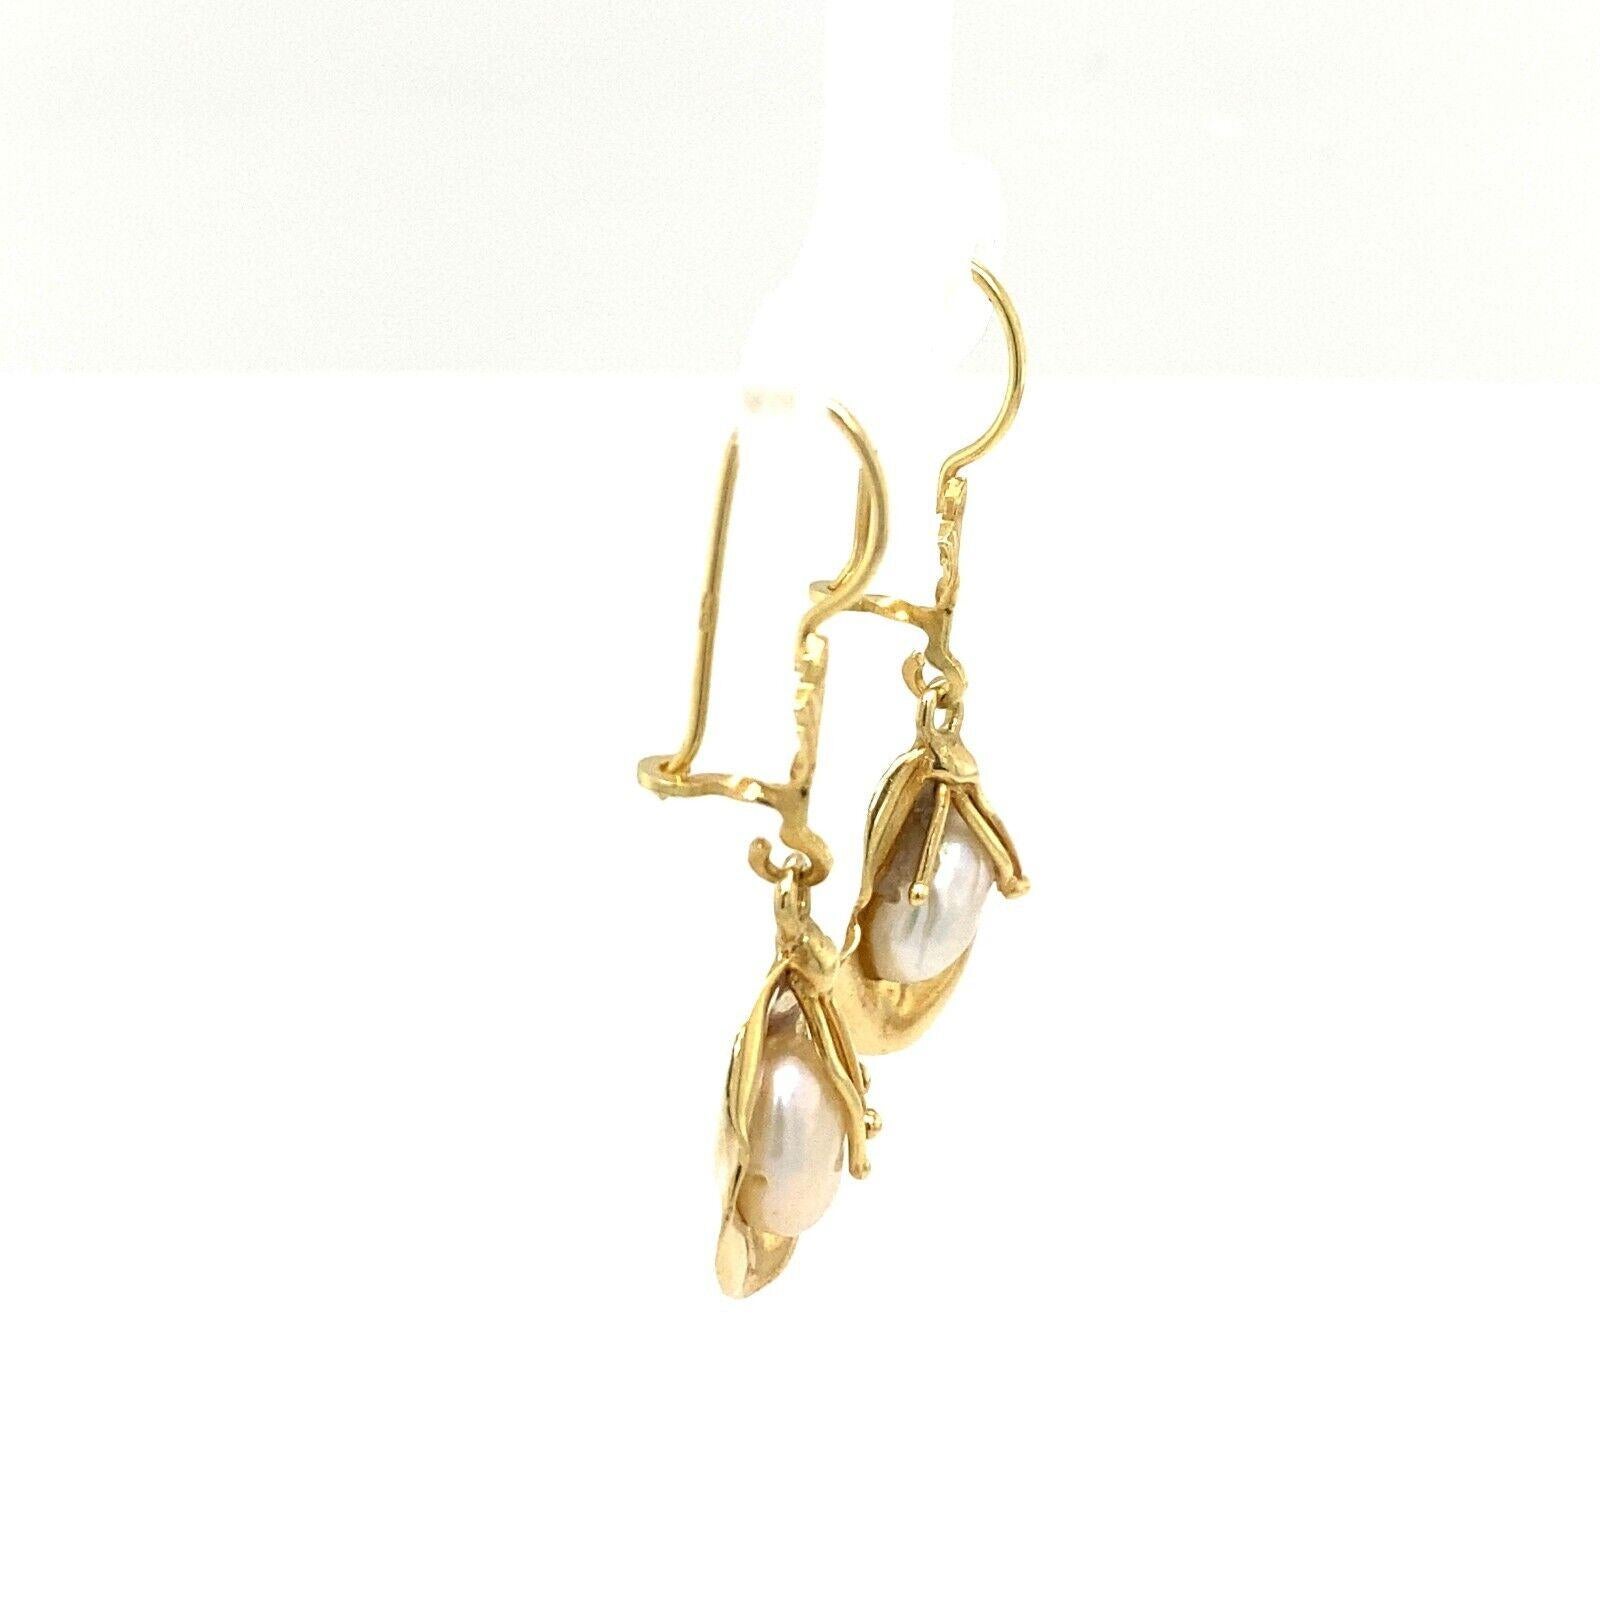 A charming pair of freshwater pearl earrings that are perfect for the elegant, minimalist fashionista. These earrings are crafted in 14ct yellow gold and feature a freshwater pearl drop that is sure to make you the center of attention.

Additional